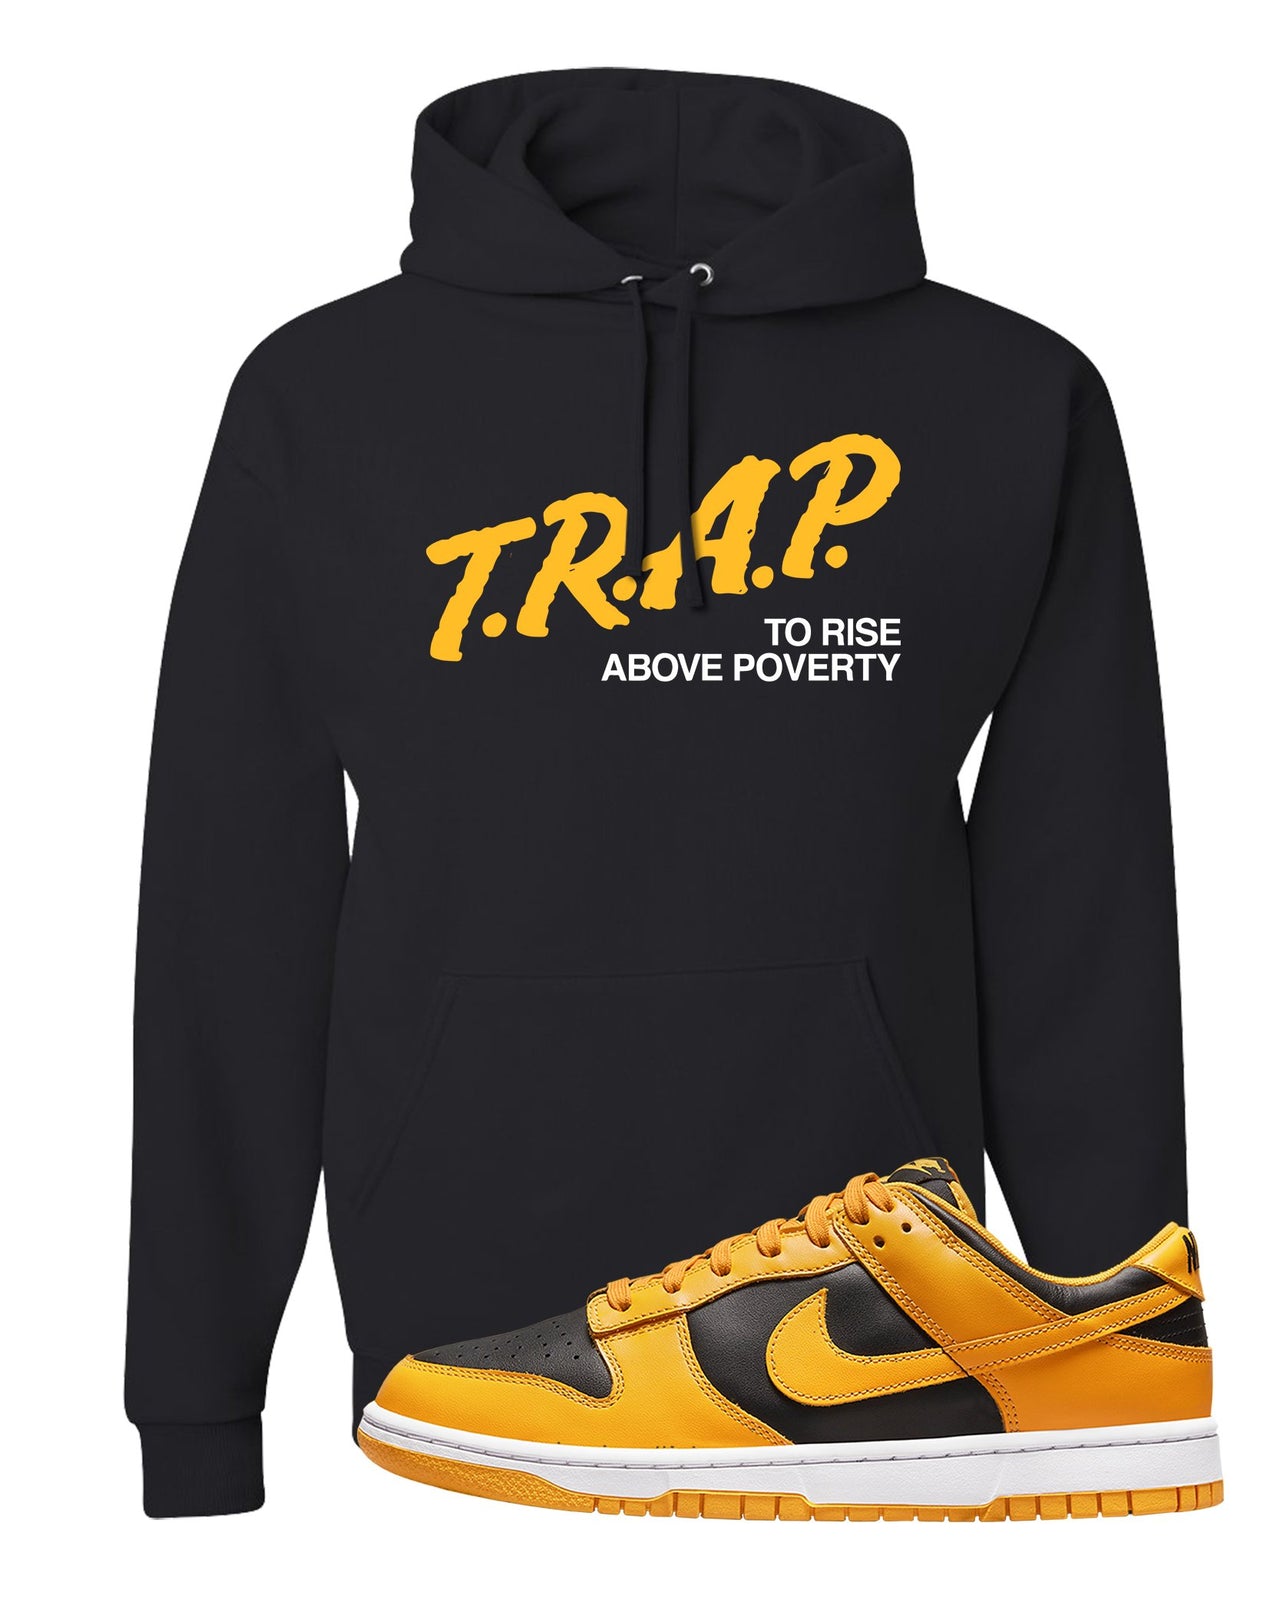 Goldenrod Low Dunks Hoodie | Trap To Rise Above Poverty, Black